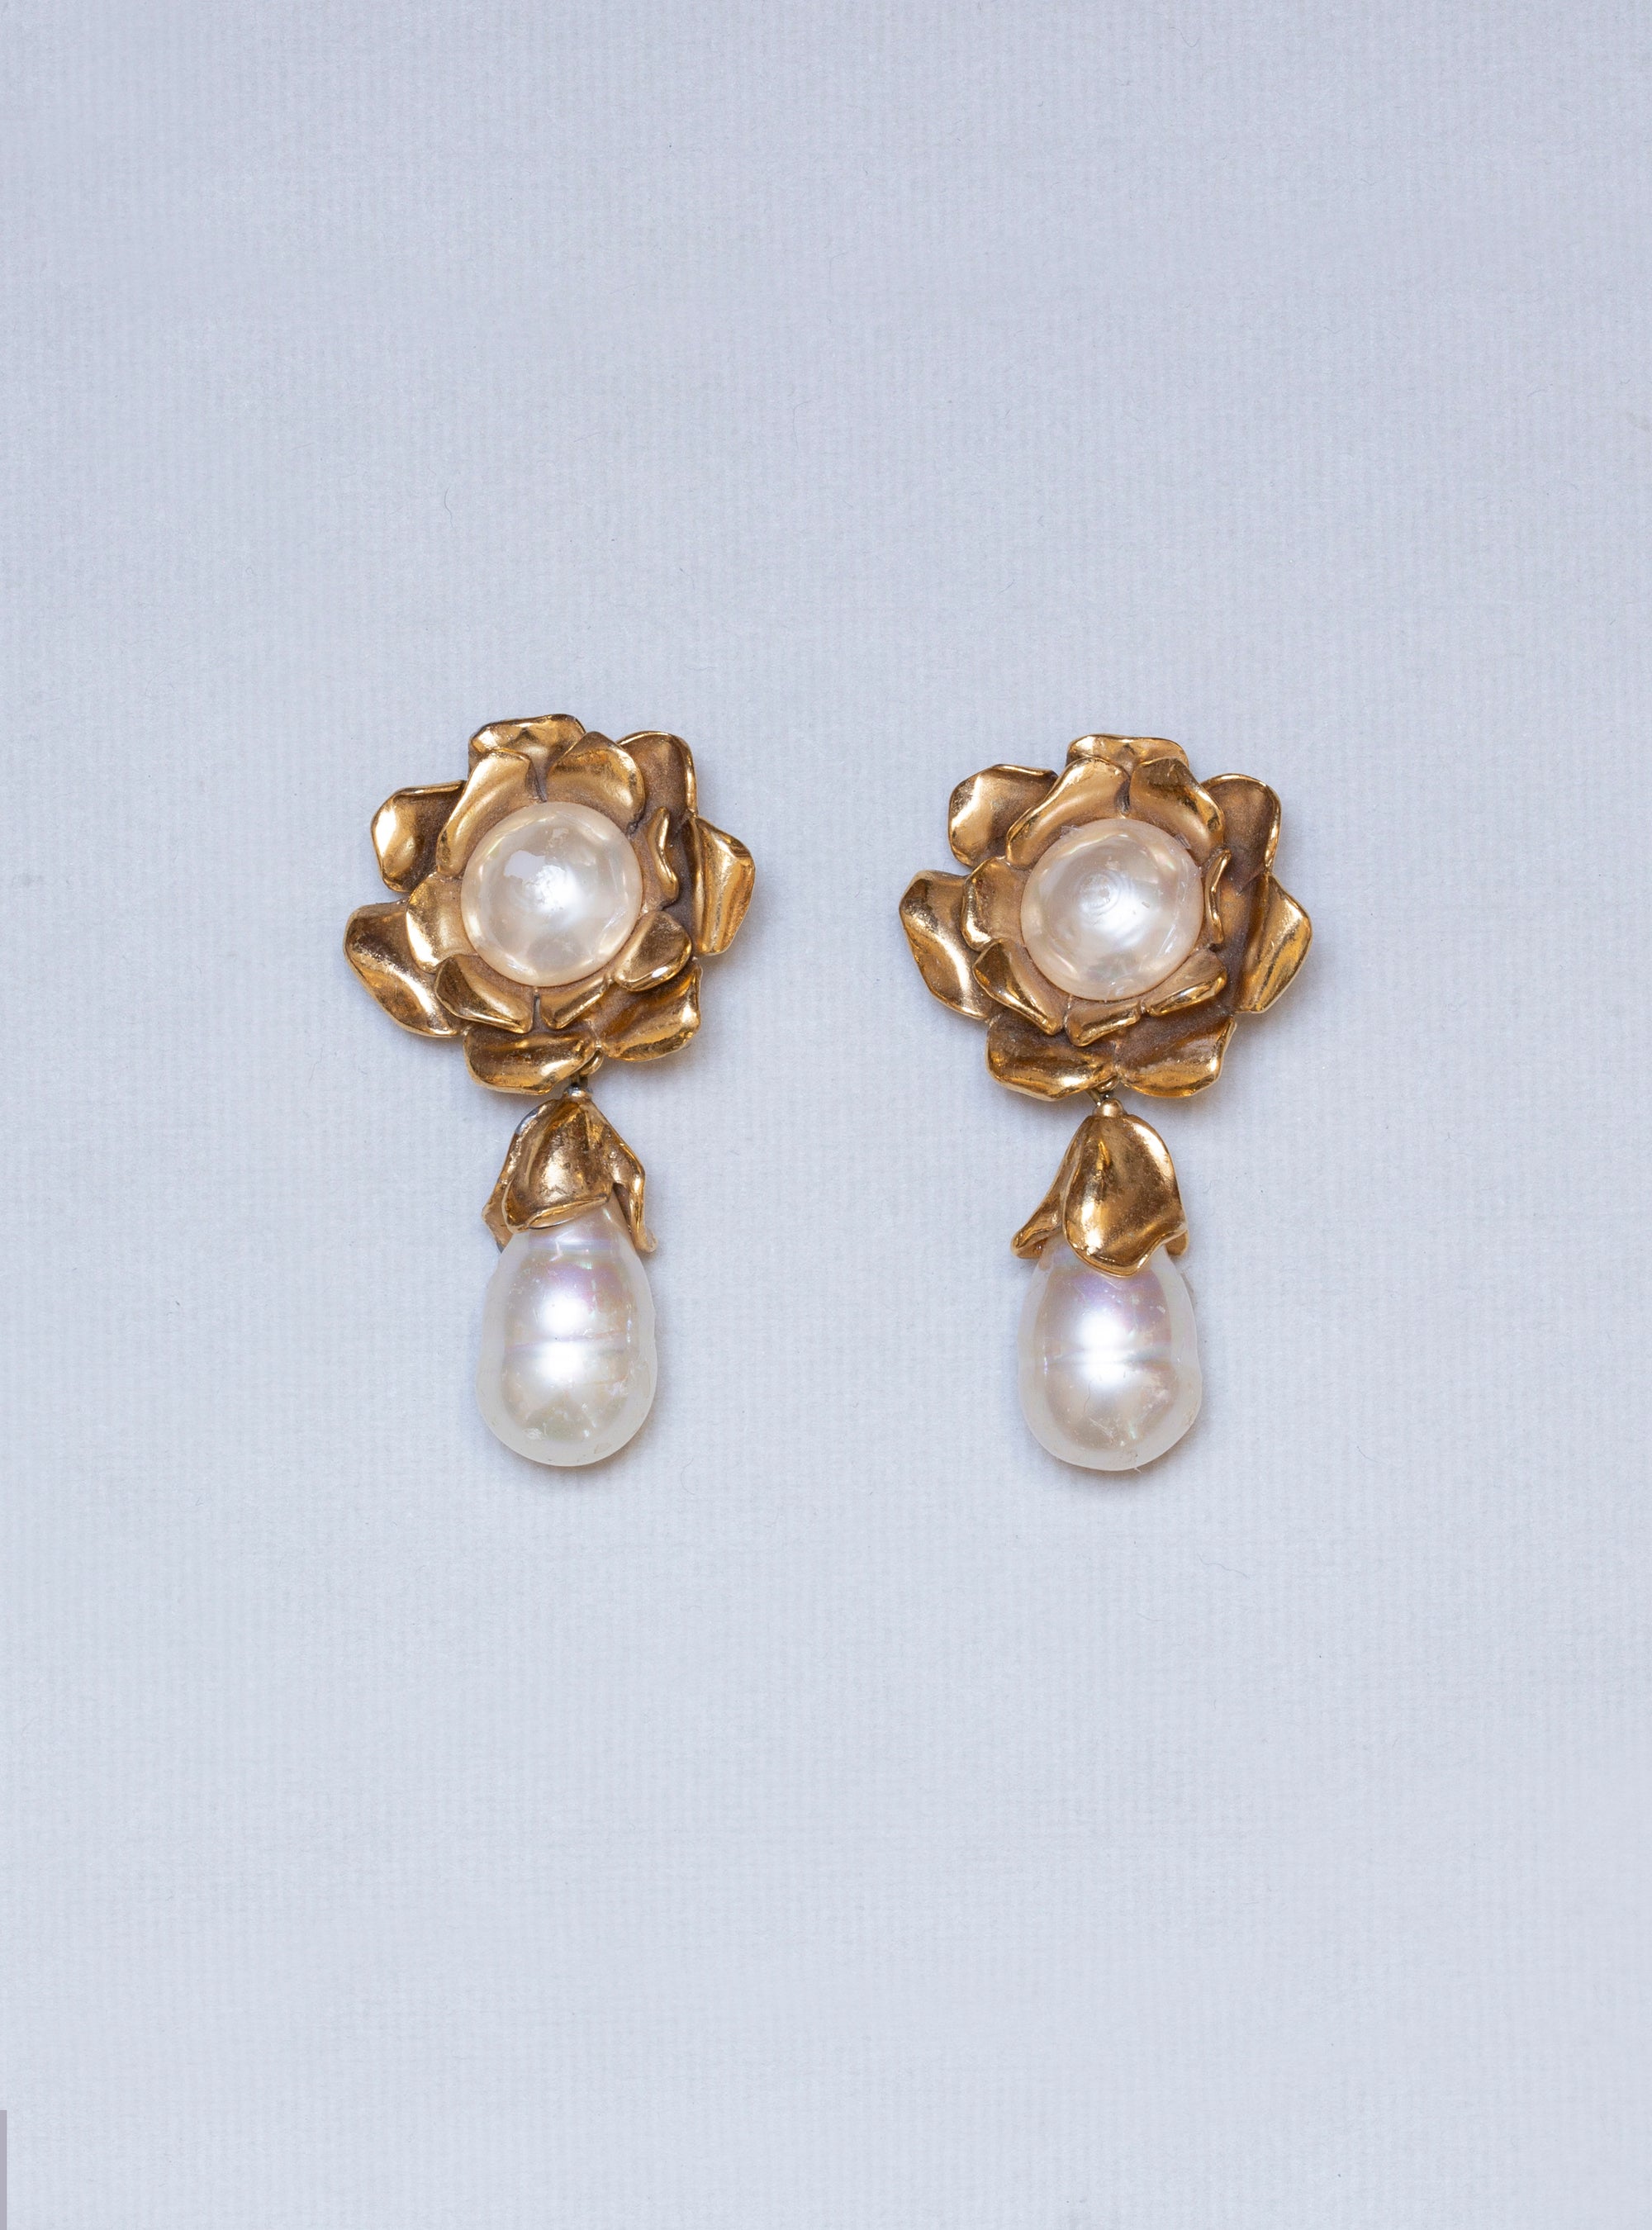 Vintage Gold Flower Clip-on Earrings with Pearls